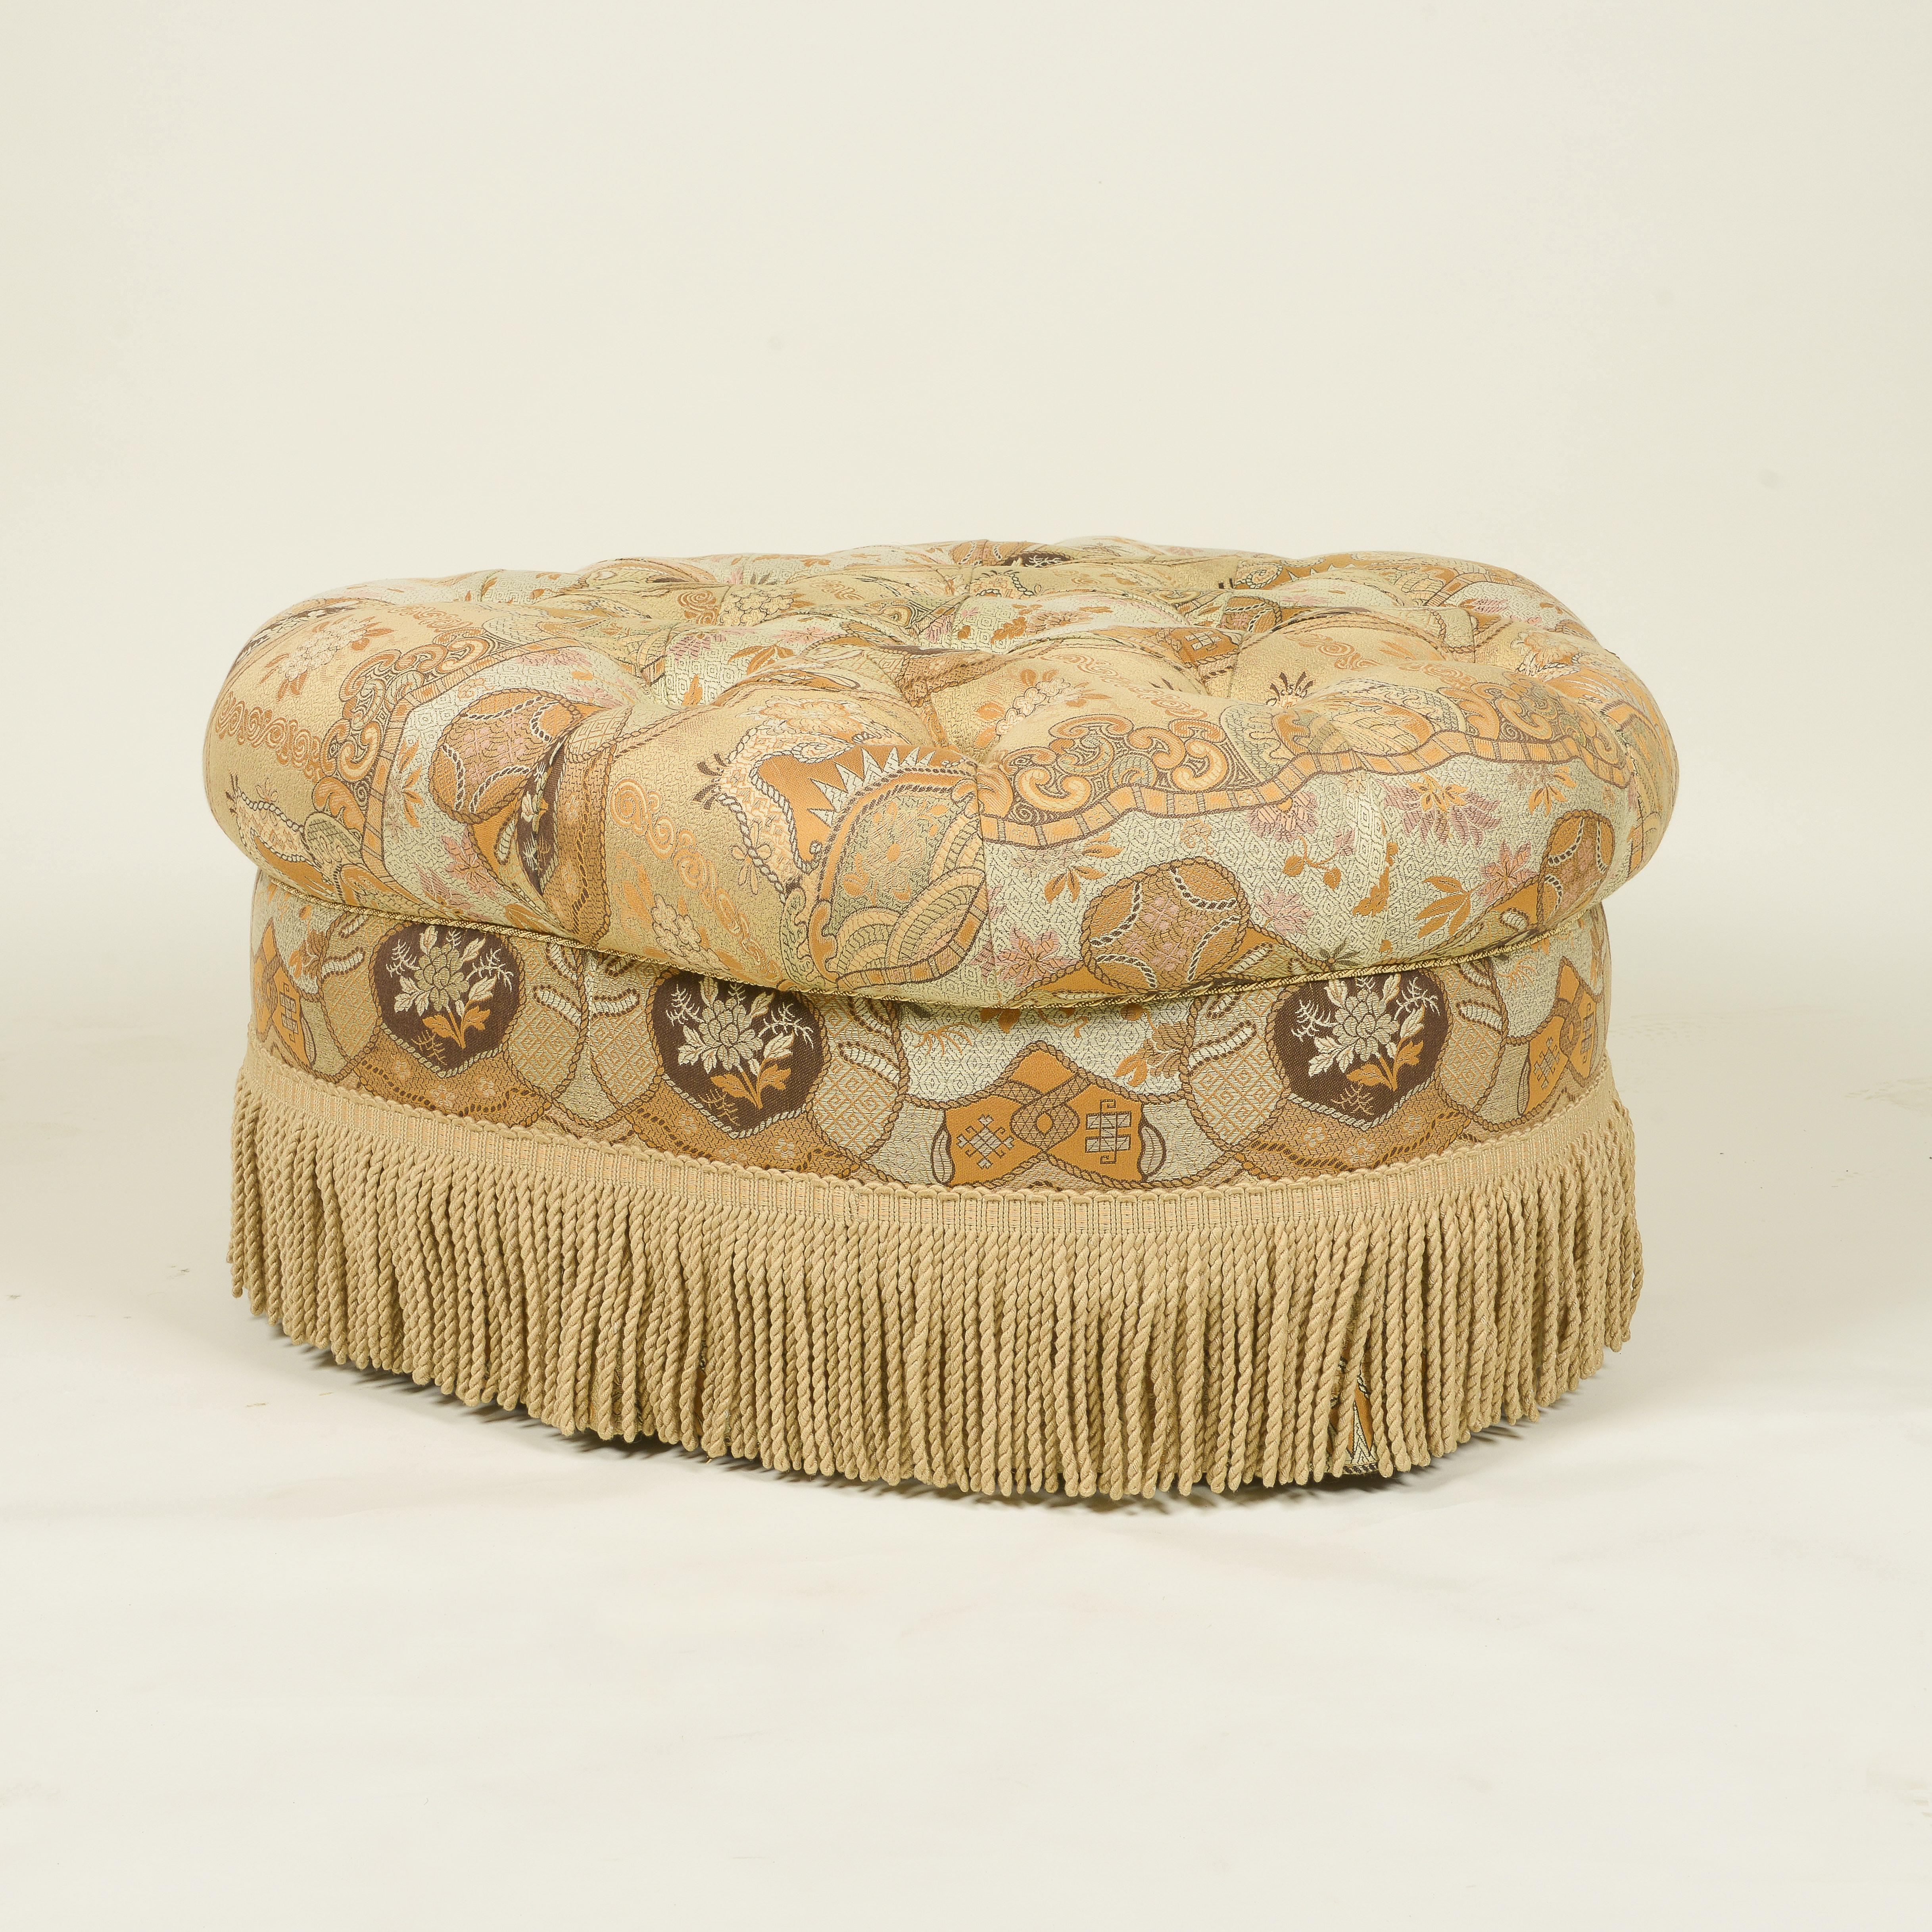 The tufted seat covered in an arabesque patterned woven silk; with bullion fringe and skirt; on dark wood square tapering feet.